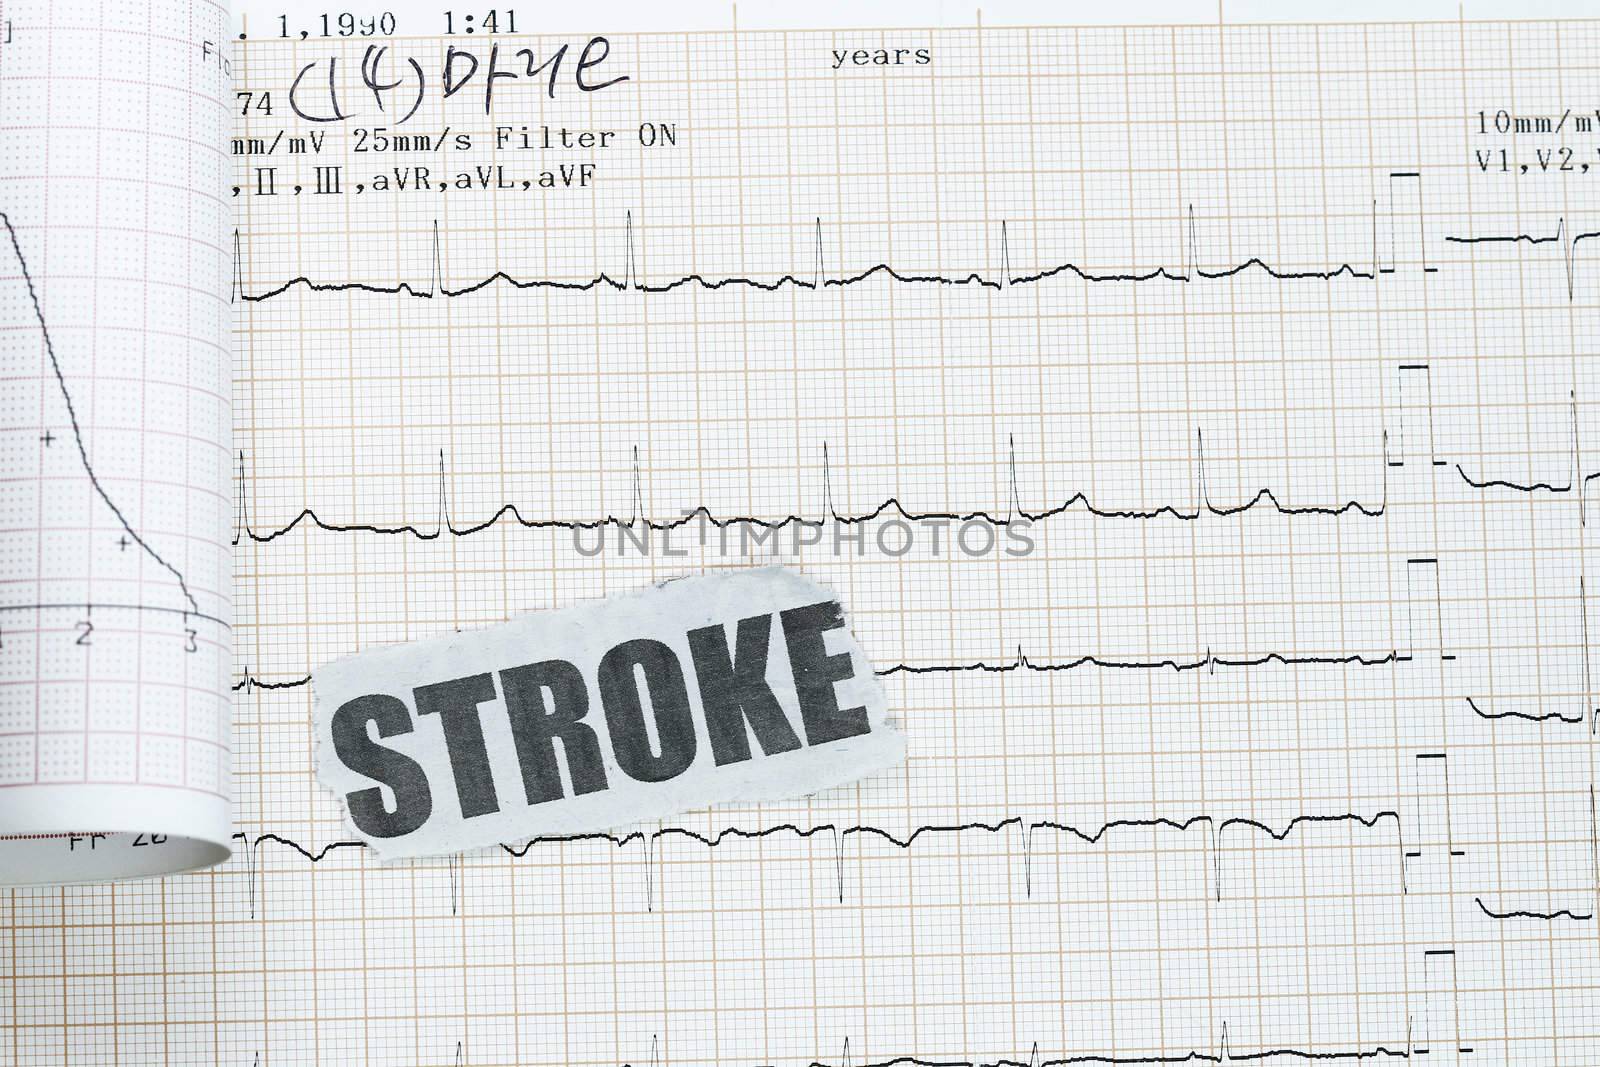 Stroke with actual ecg ekg chart - many uses in medical purpose.